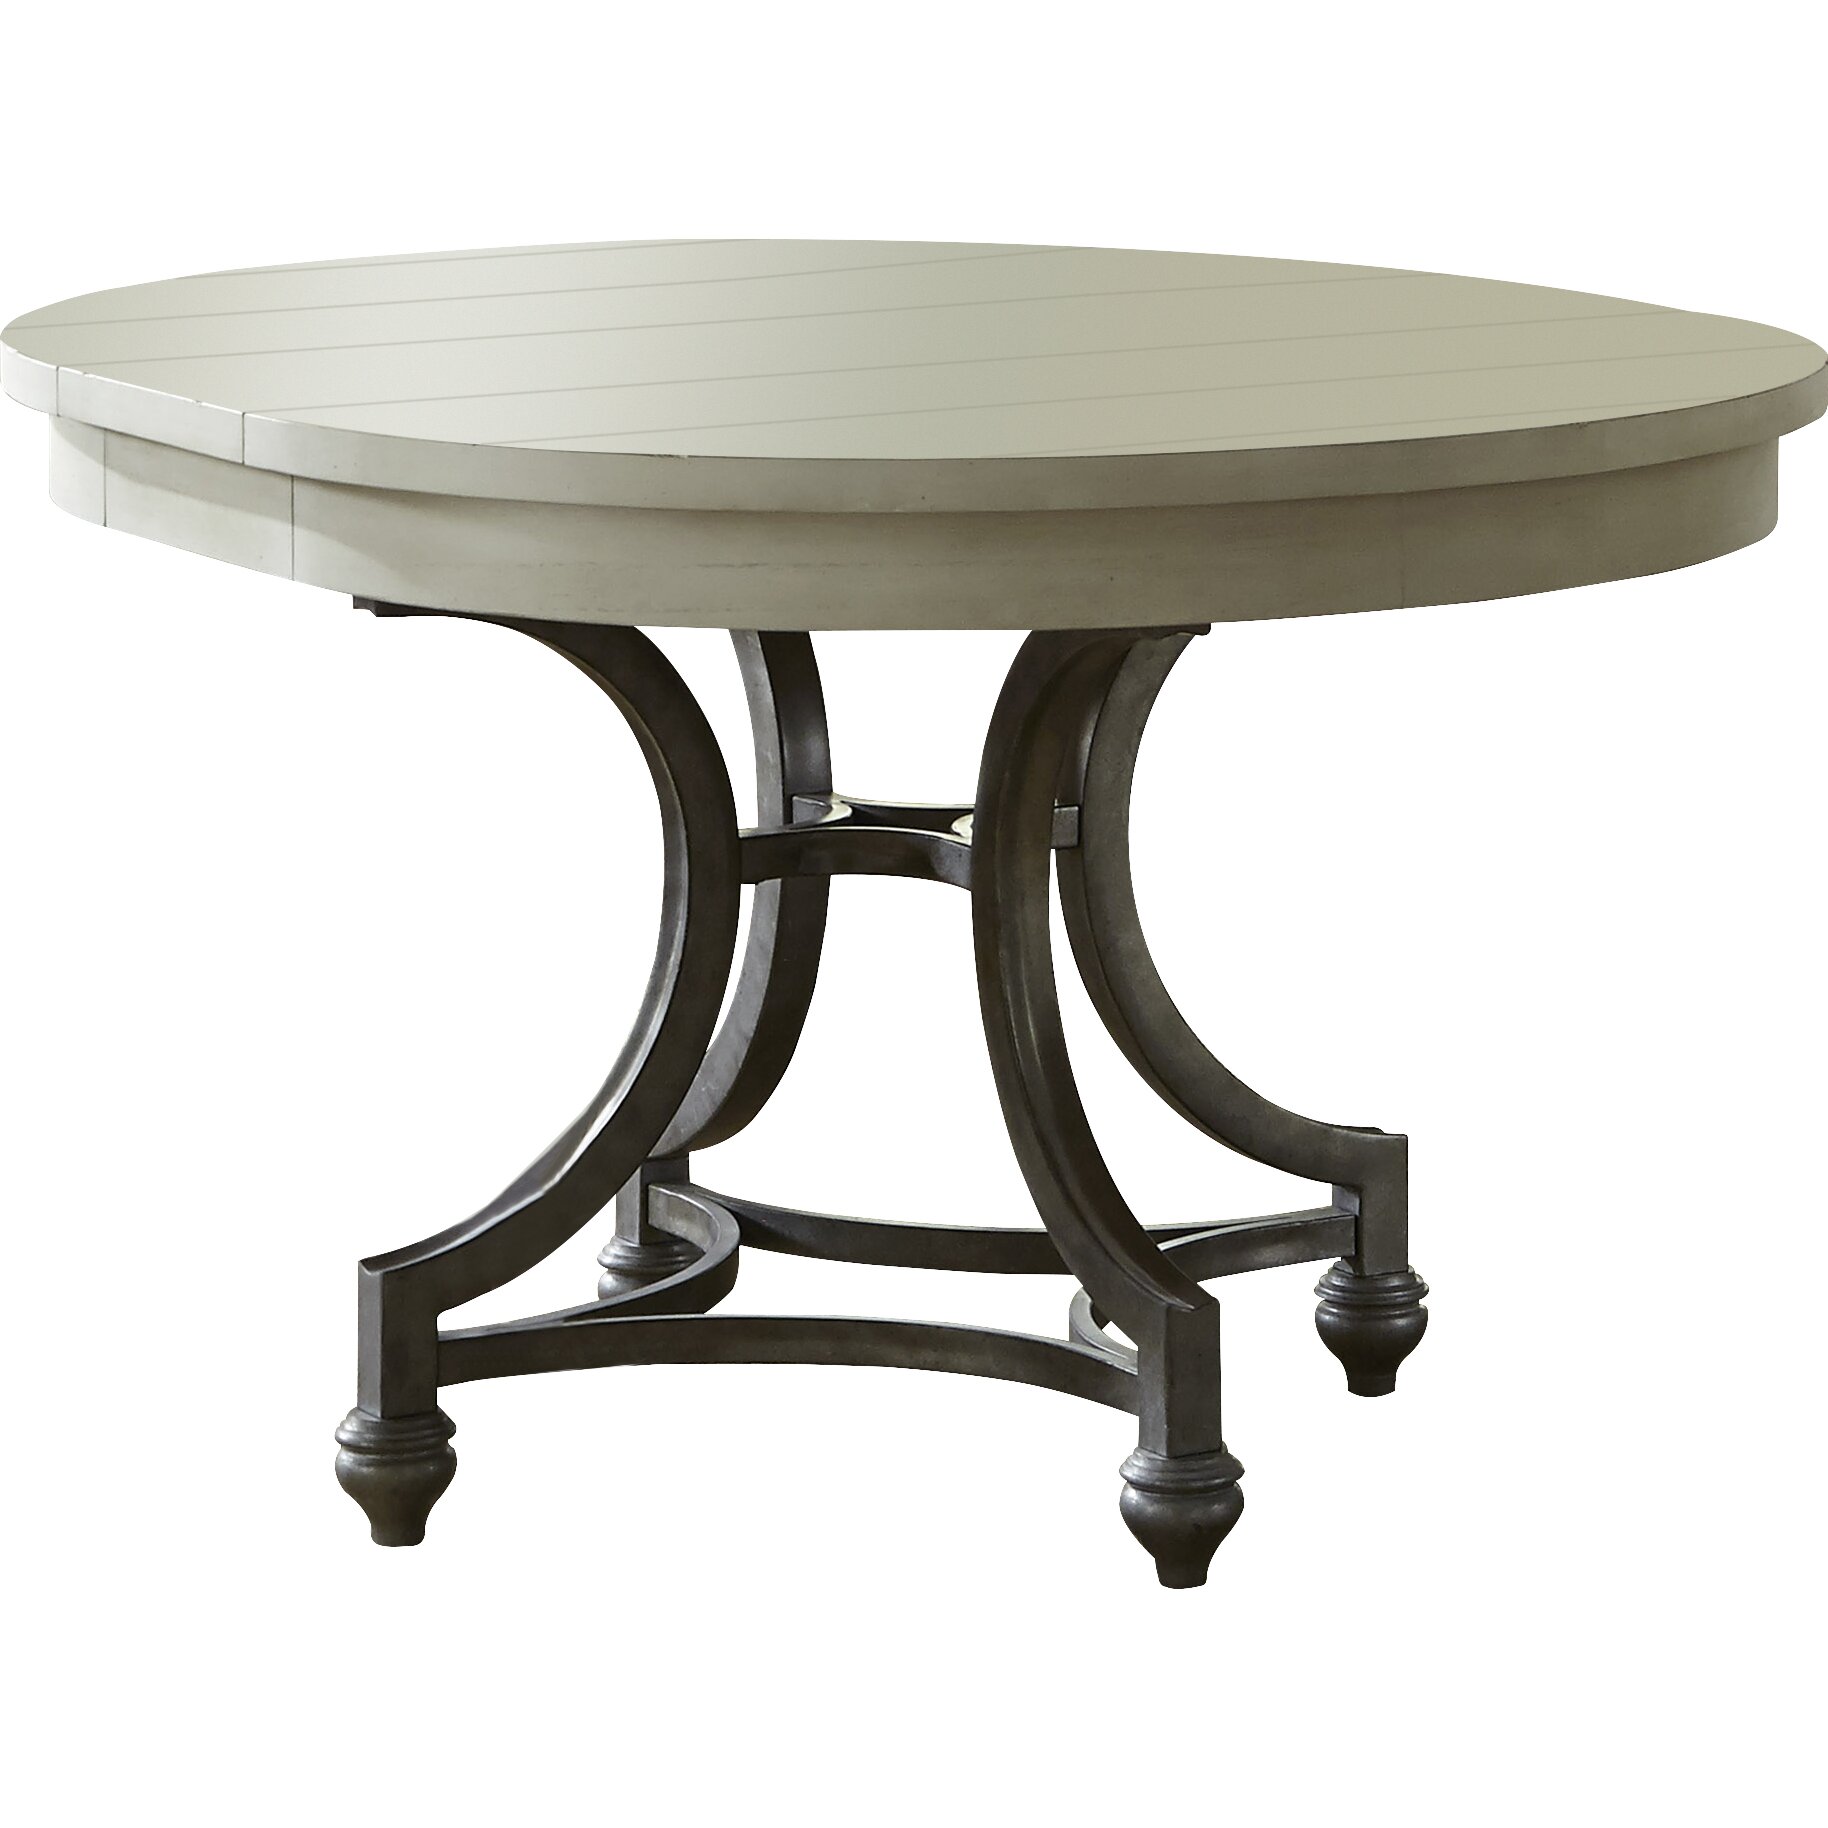 Beachcrest Home Stamford Round Dining Table & Reviews ...
